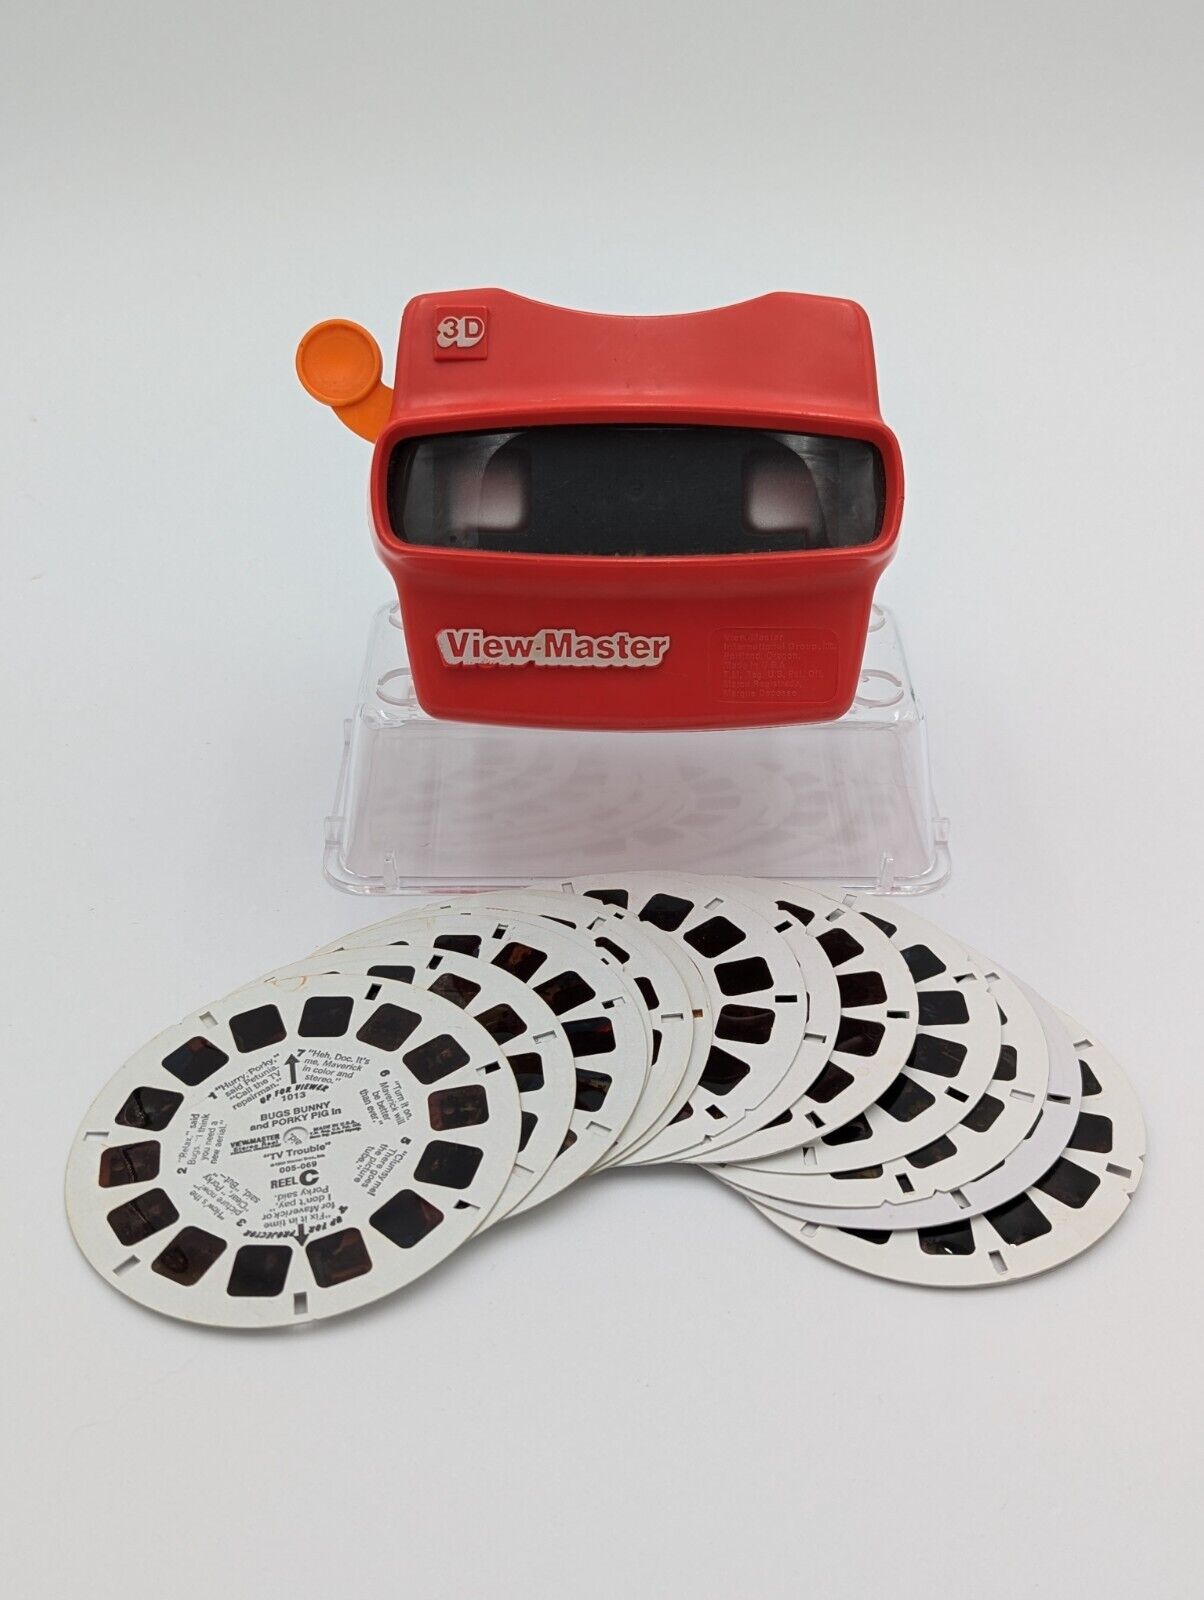 Vtg Viewmaster 3D viewer Red with orange handle. 14 Reels. Bugs Bunny. Discovery